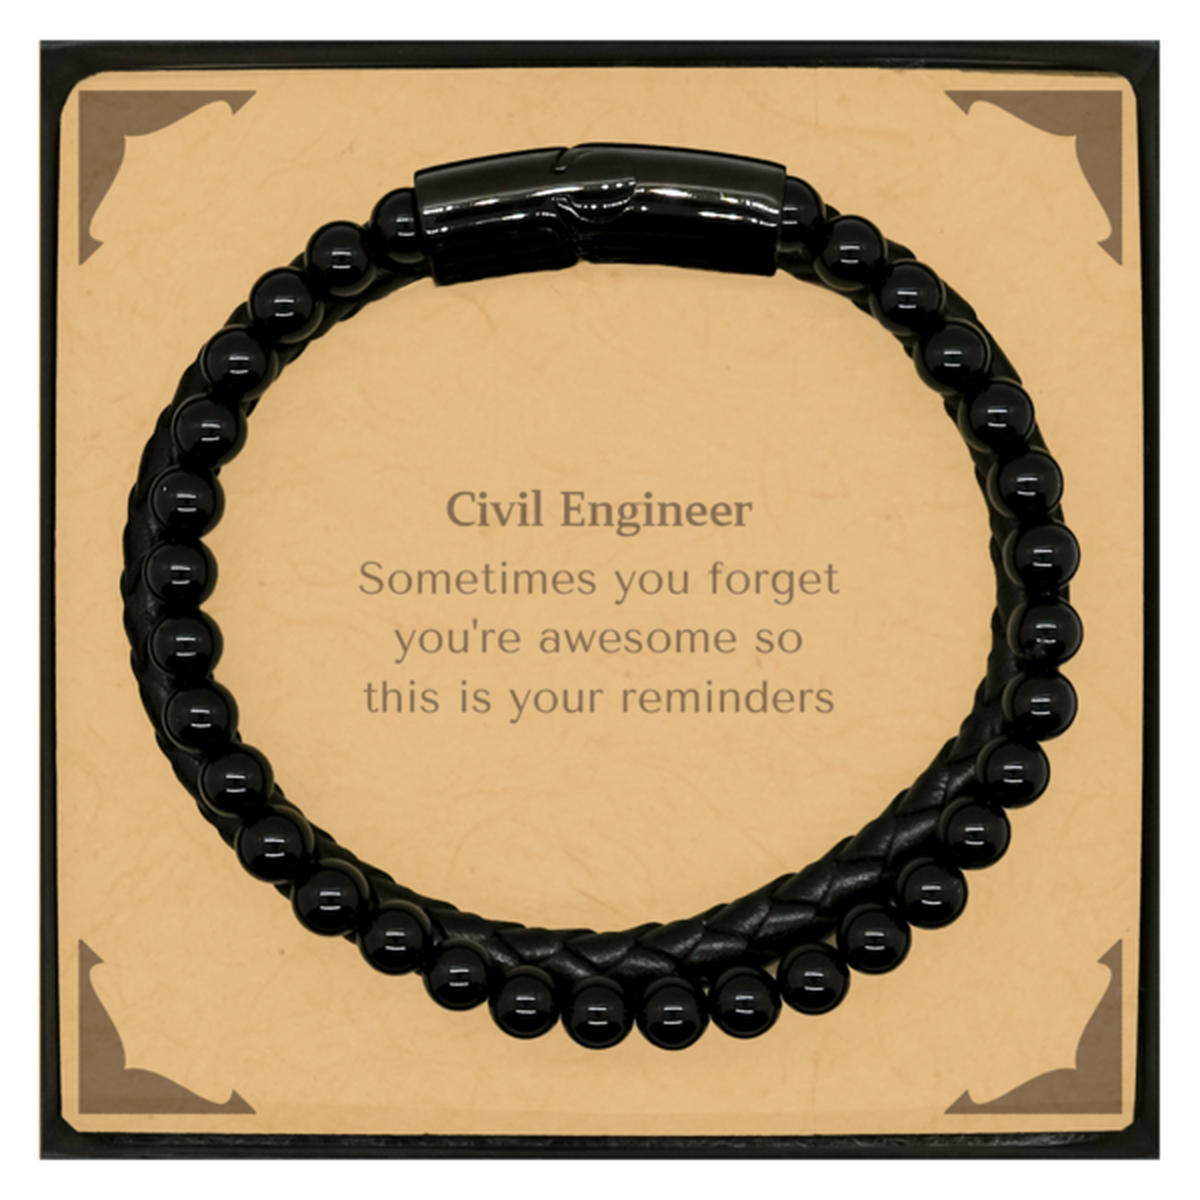 Sentimental Civil Engineer Stone Leather Bracelets, Civil Engineer Sometimes you forget you're awesome so this is your reminders, Graduation Christmas Birthday Gifts for Civil Engineer, Men, Women, Coworkers